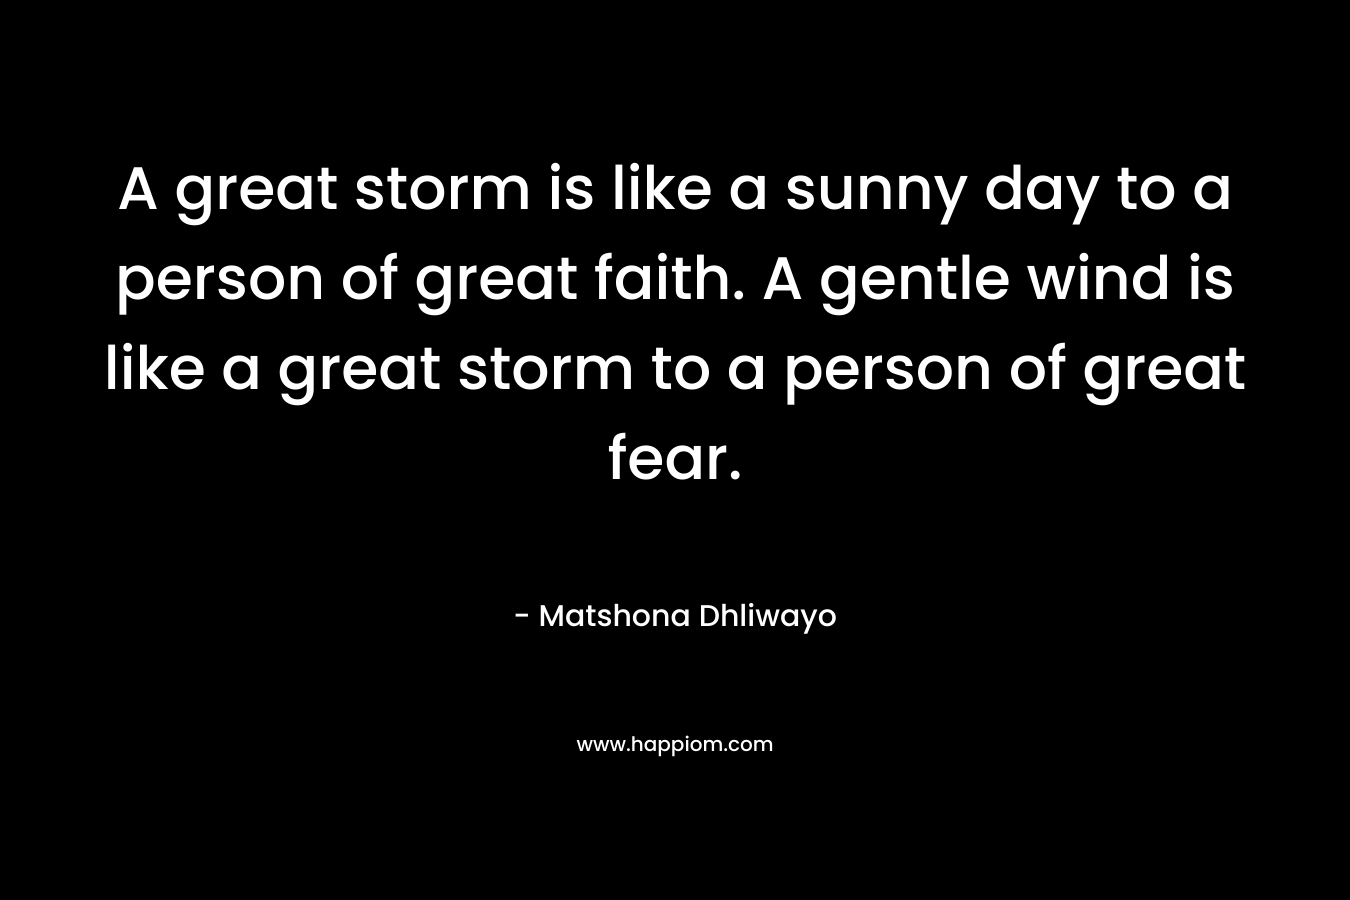 A great storm is like a sunny day to a person of great faith. A gentle wind is like a great storm to a person of great fear.